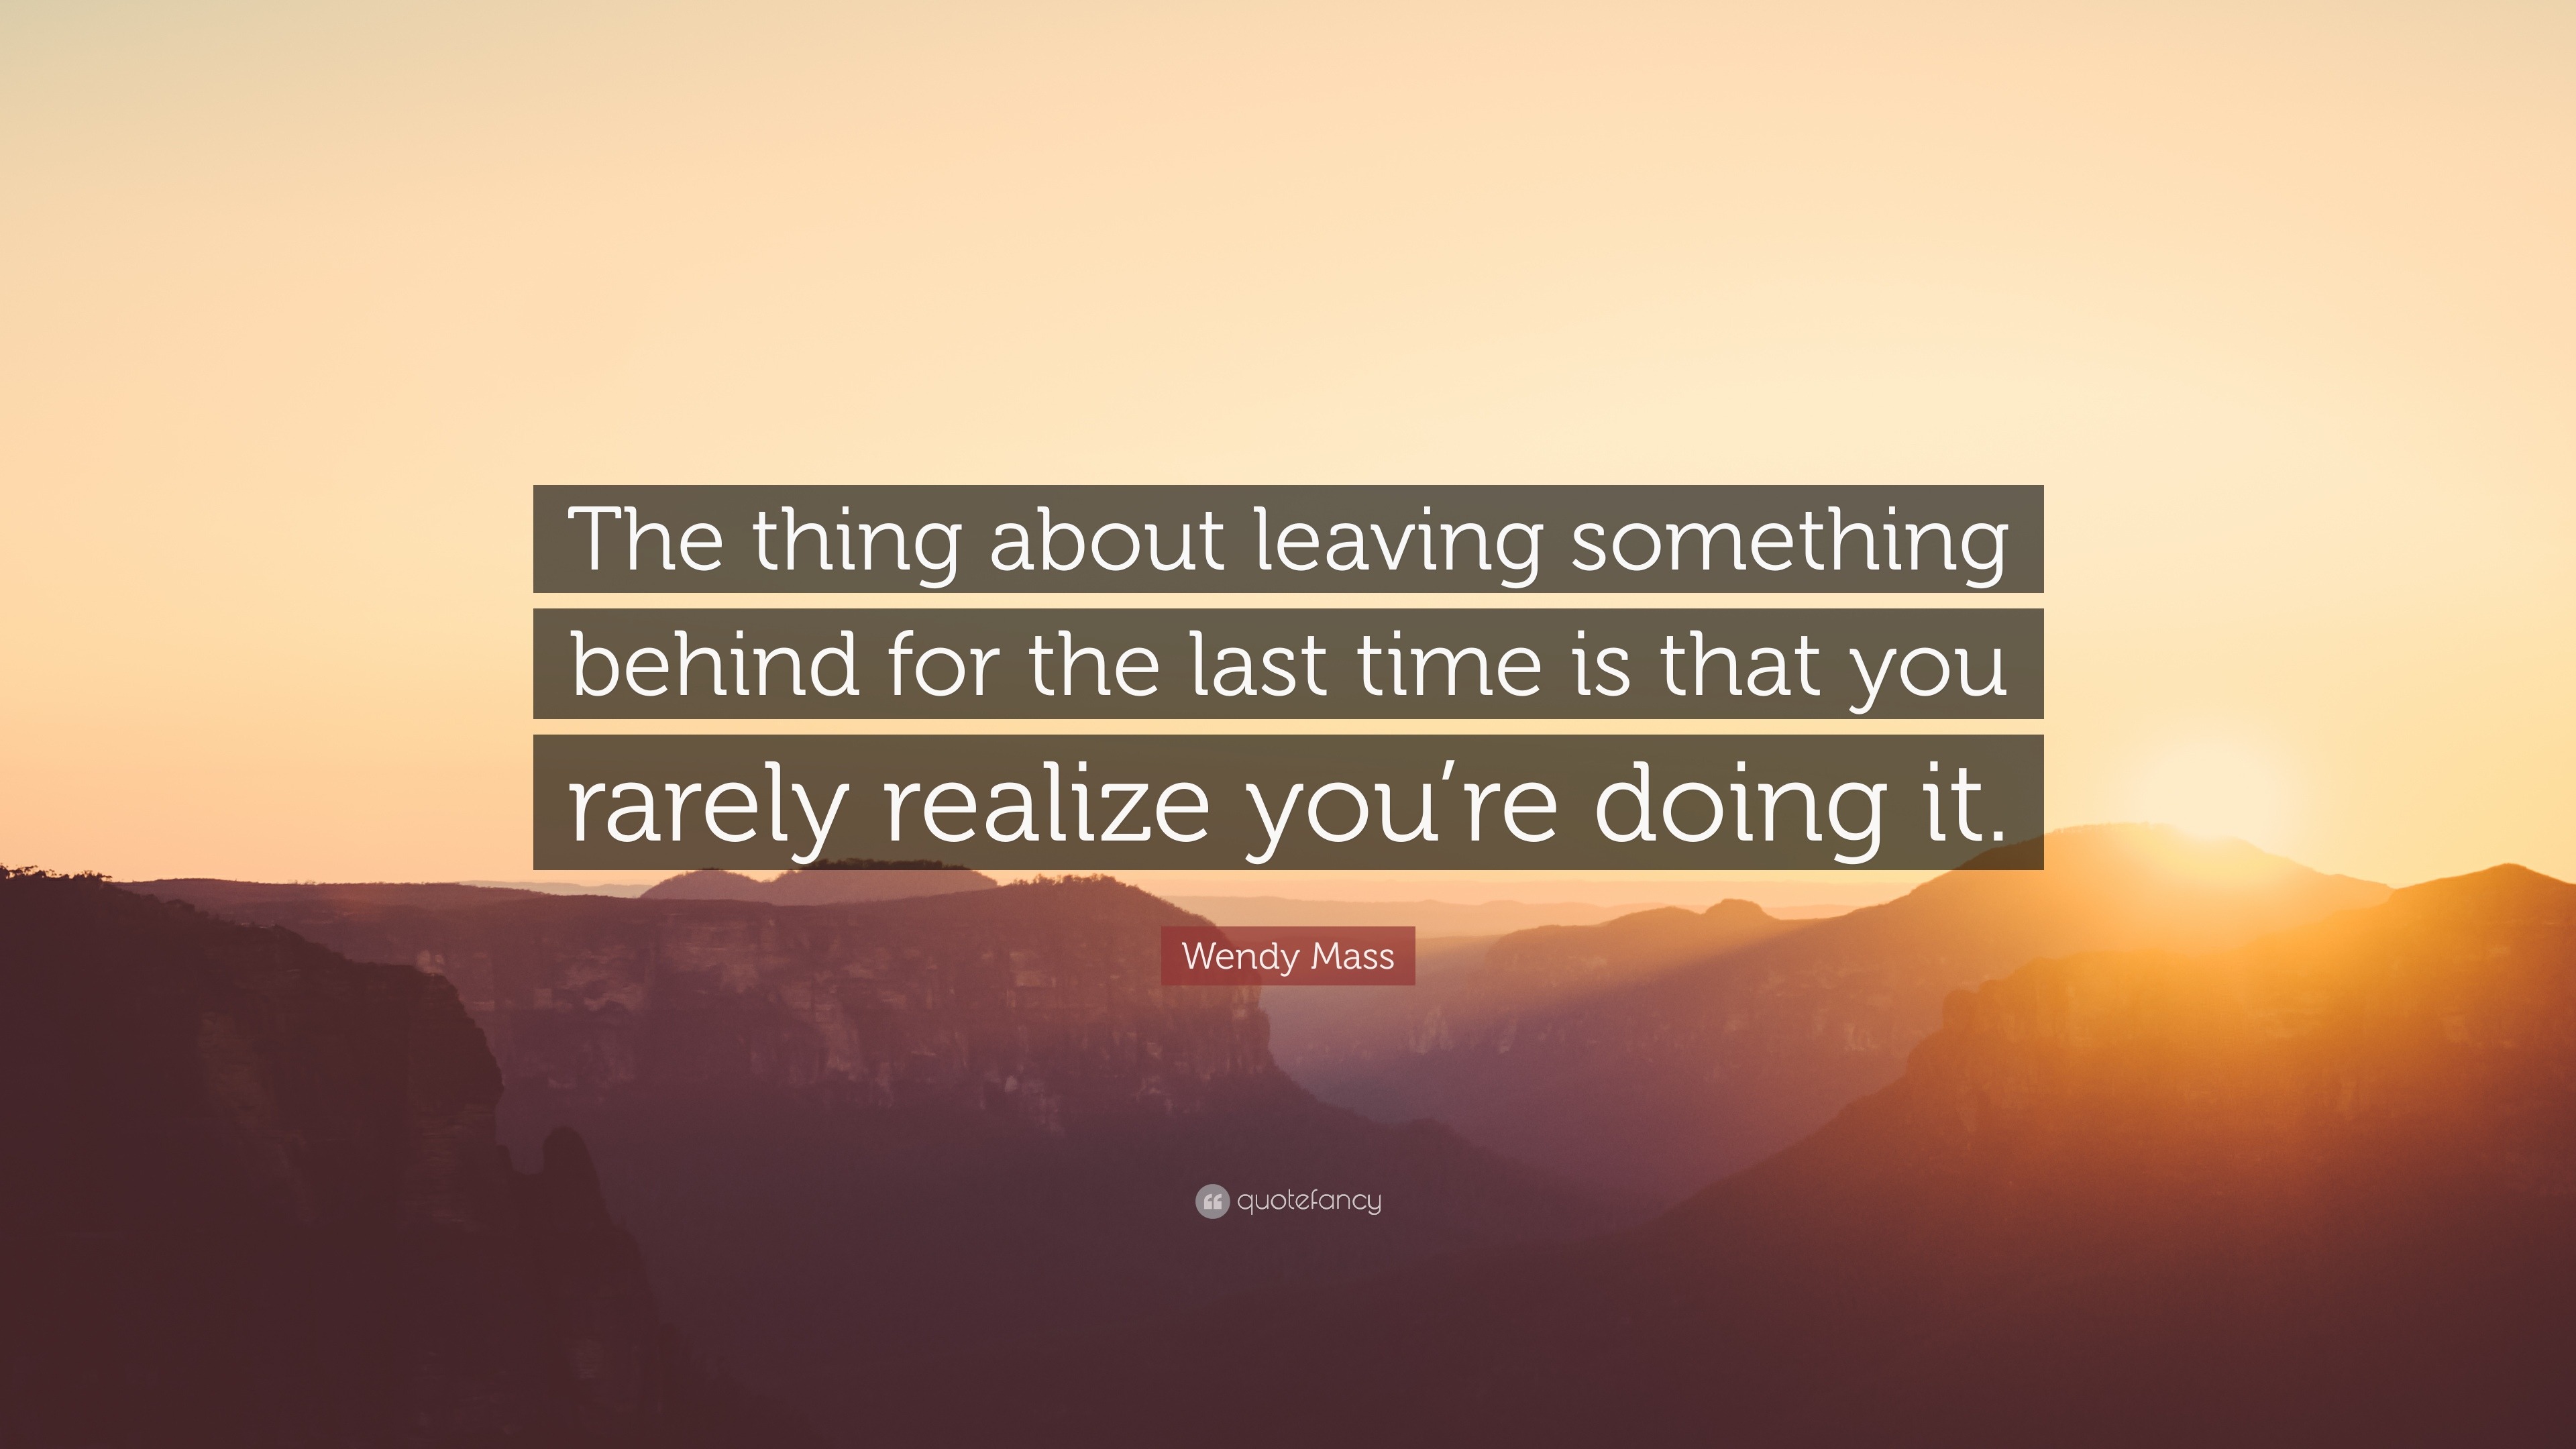 Wendy Mass Quote: “The thing about leaving something behind for the ...